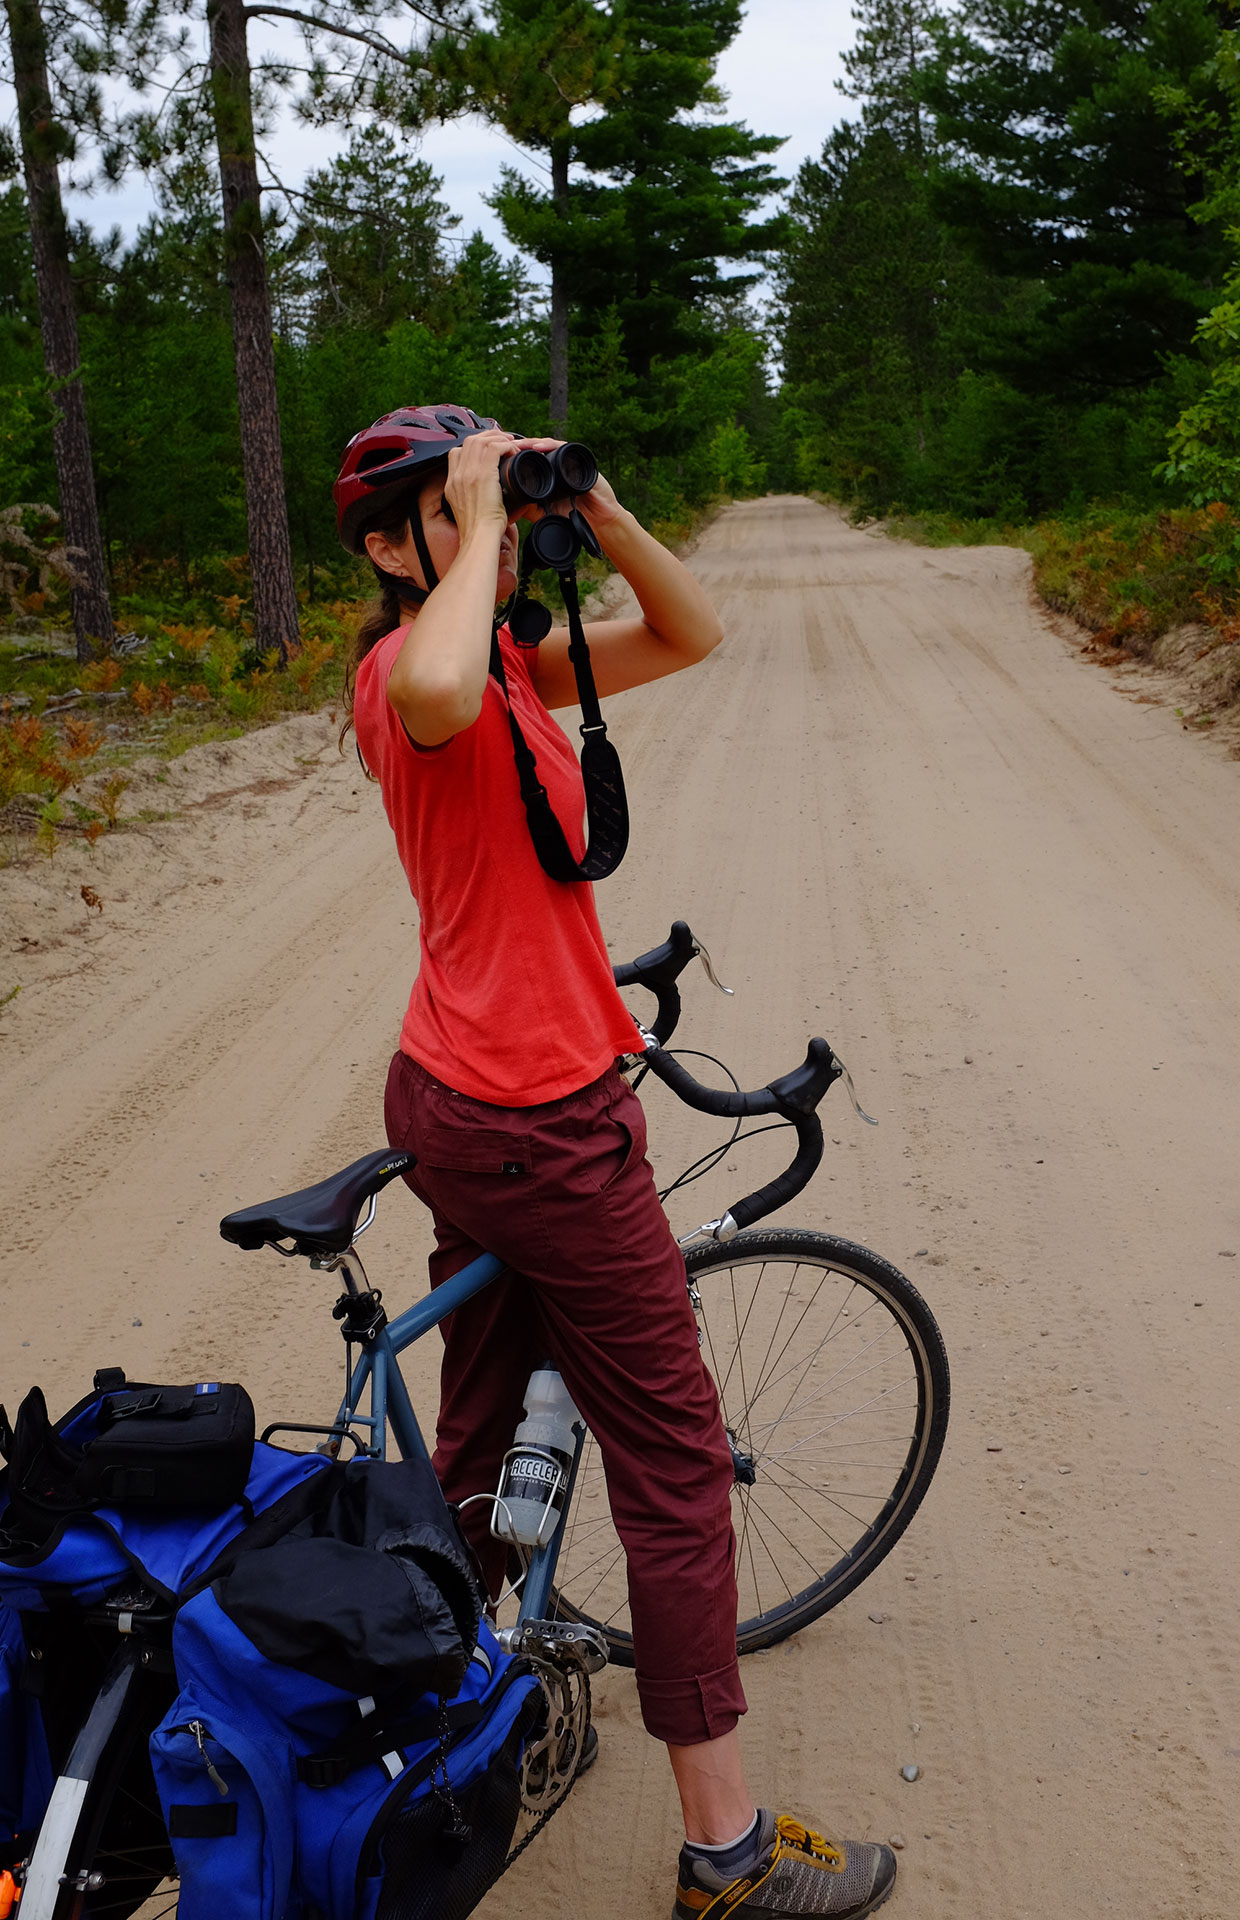 a woman stops on her bicycle to use binoculars for birdwatching